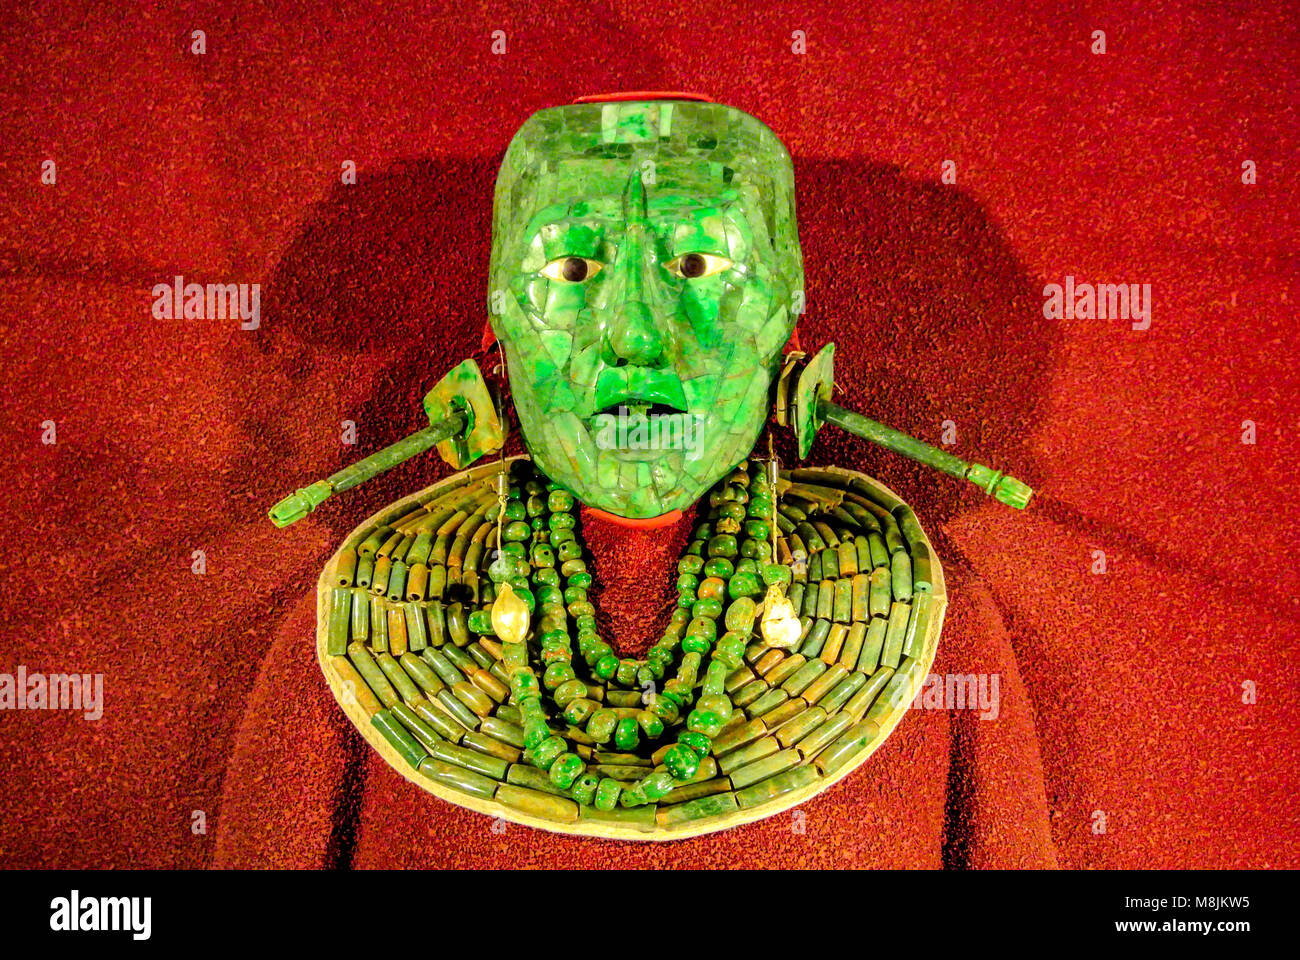 Mexico City, CDMX, Mexico, Funerary Mask of jade with funerary offerings for Pakal King of Palenque, Editorial only. Stock Photo